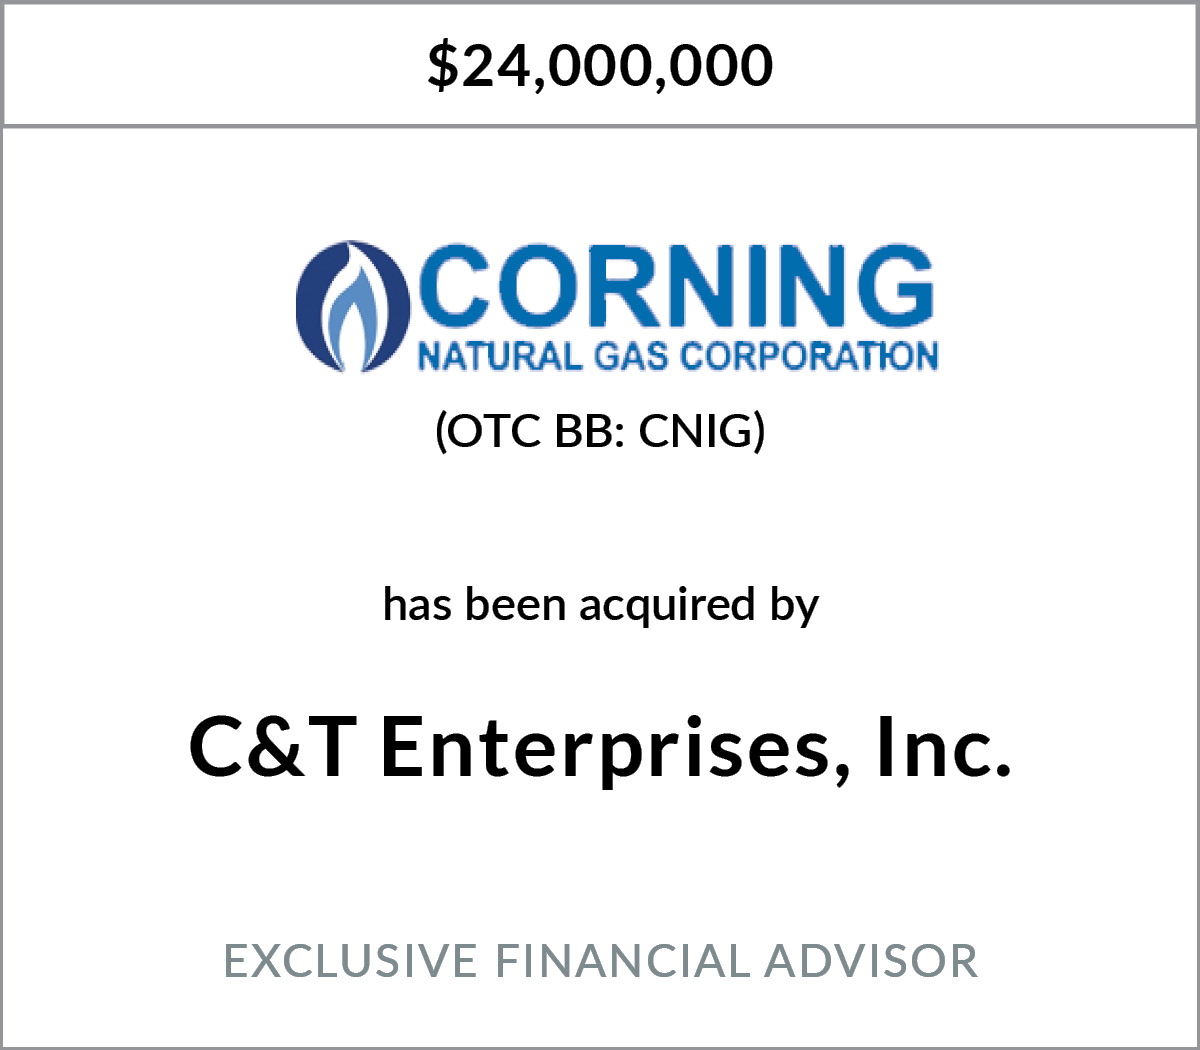 Corning Natural Gas Corporation has agreed to be acquired by C&T Enterprises, Inc.